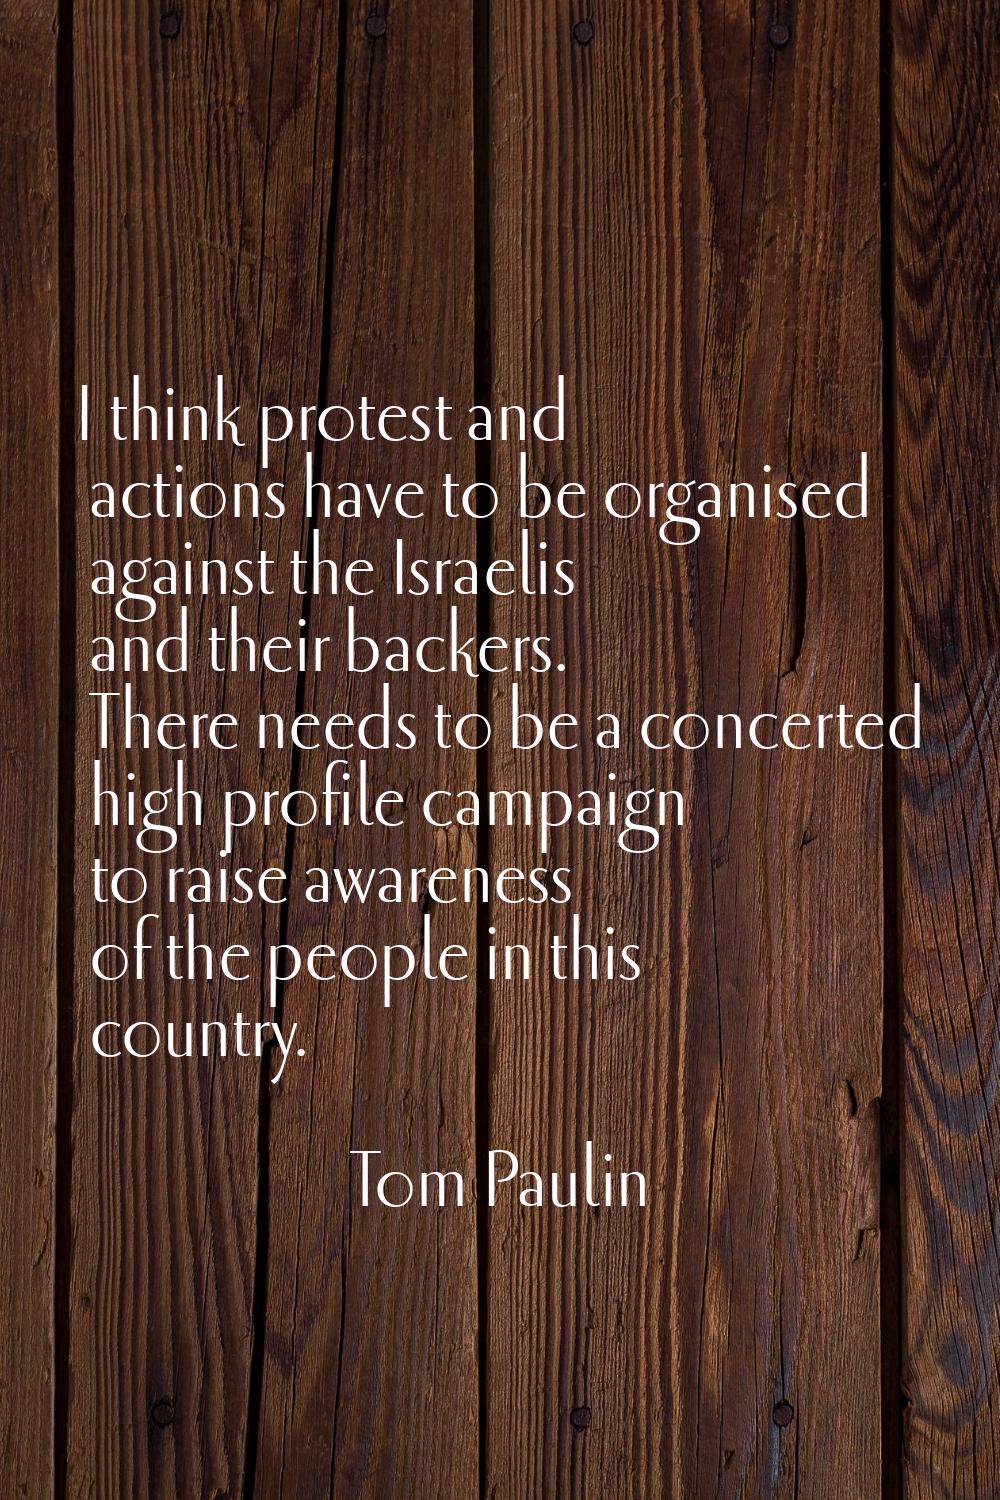 I think protest and actions have to be organised against the Israelis and their backers. There need